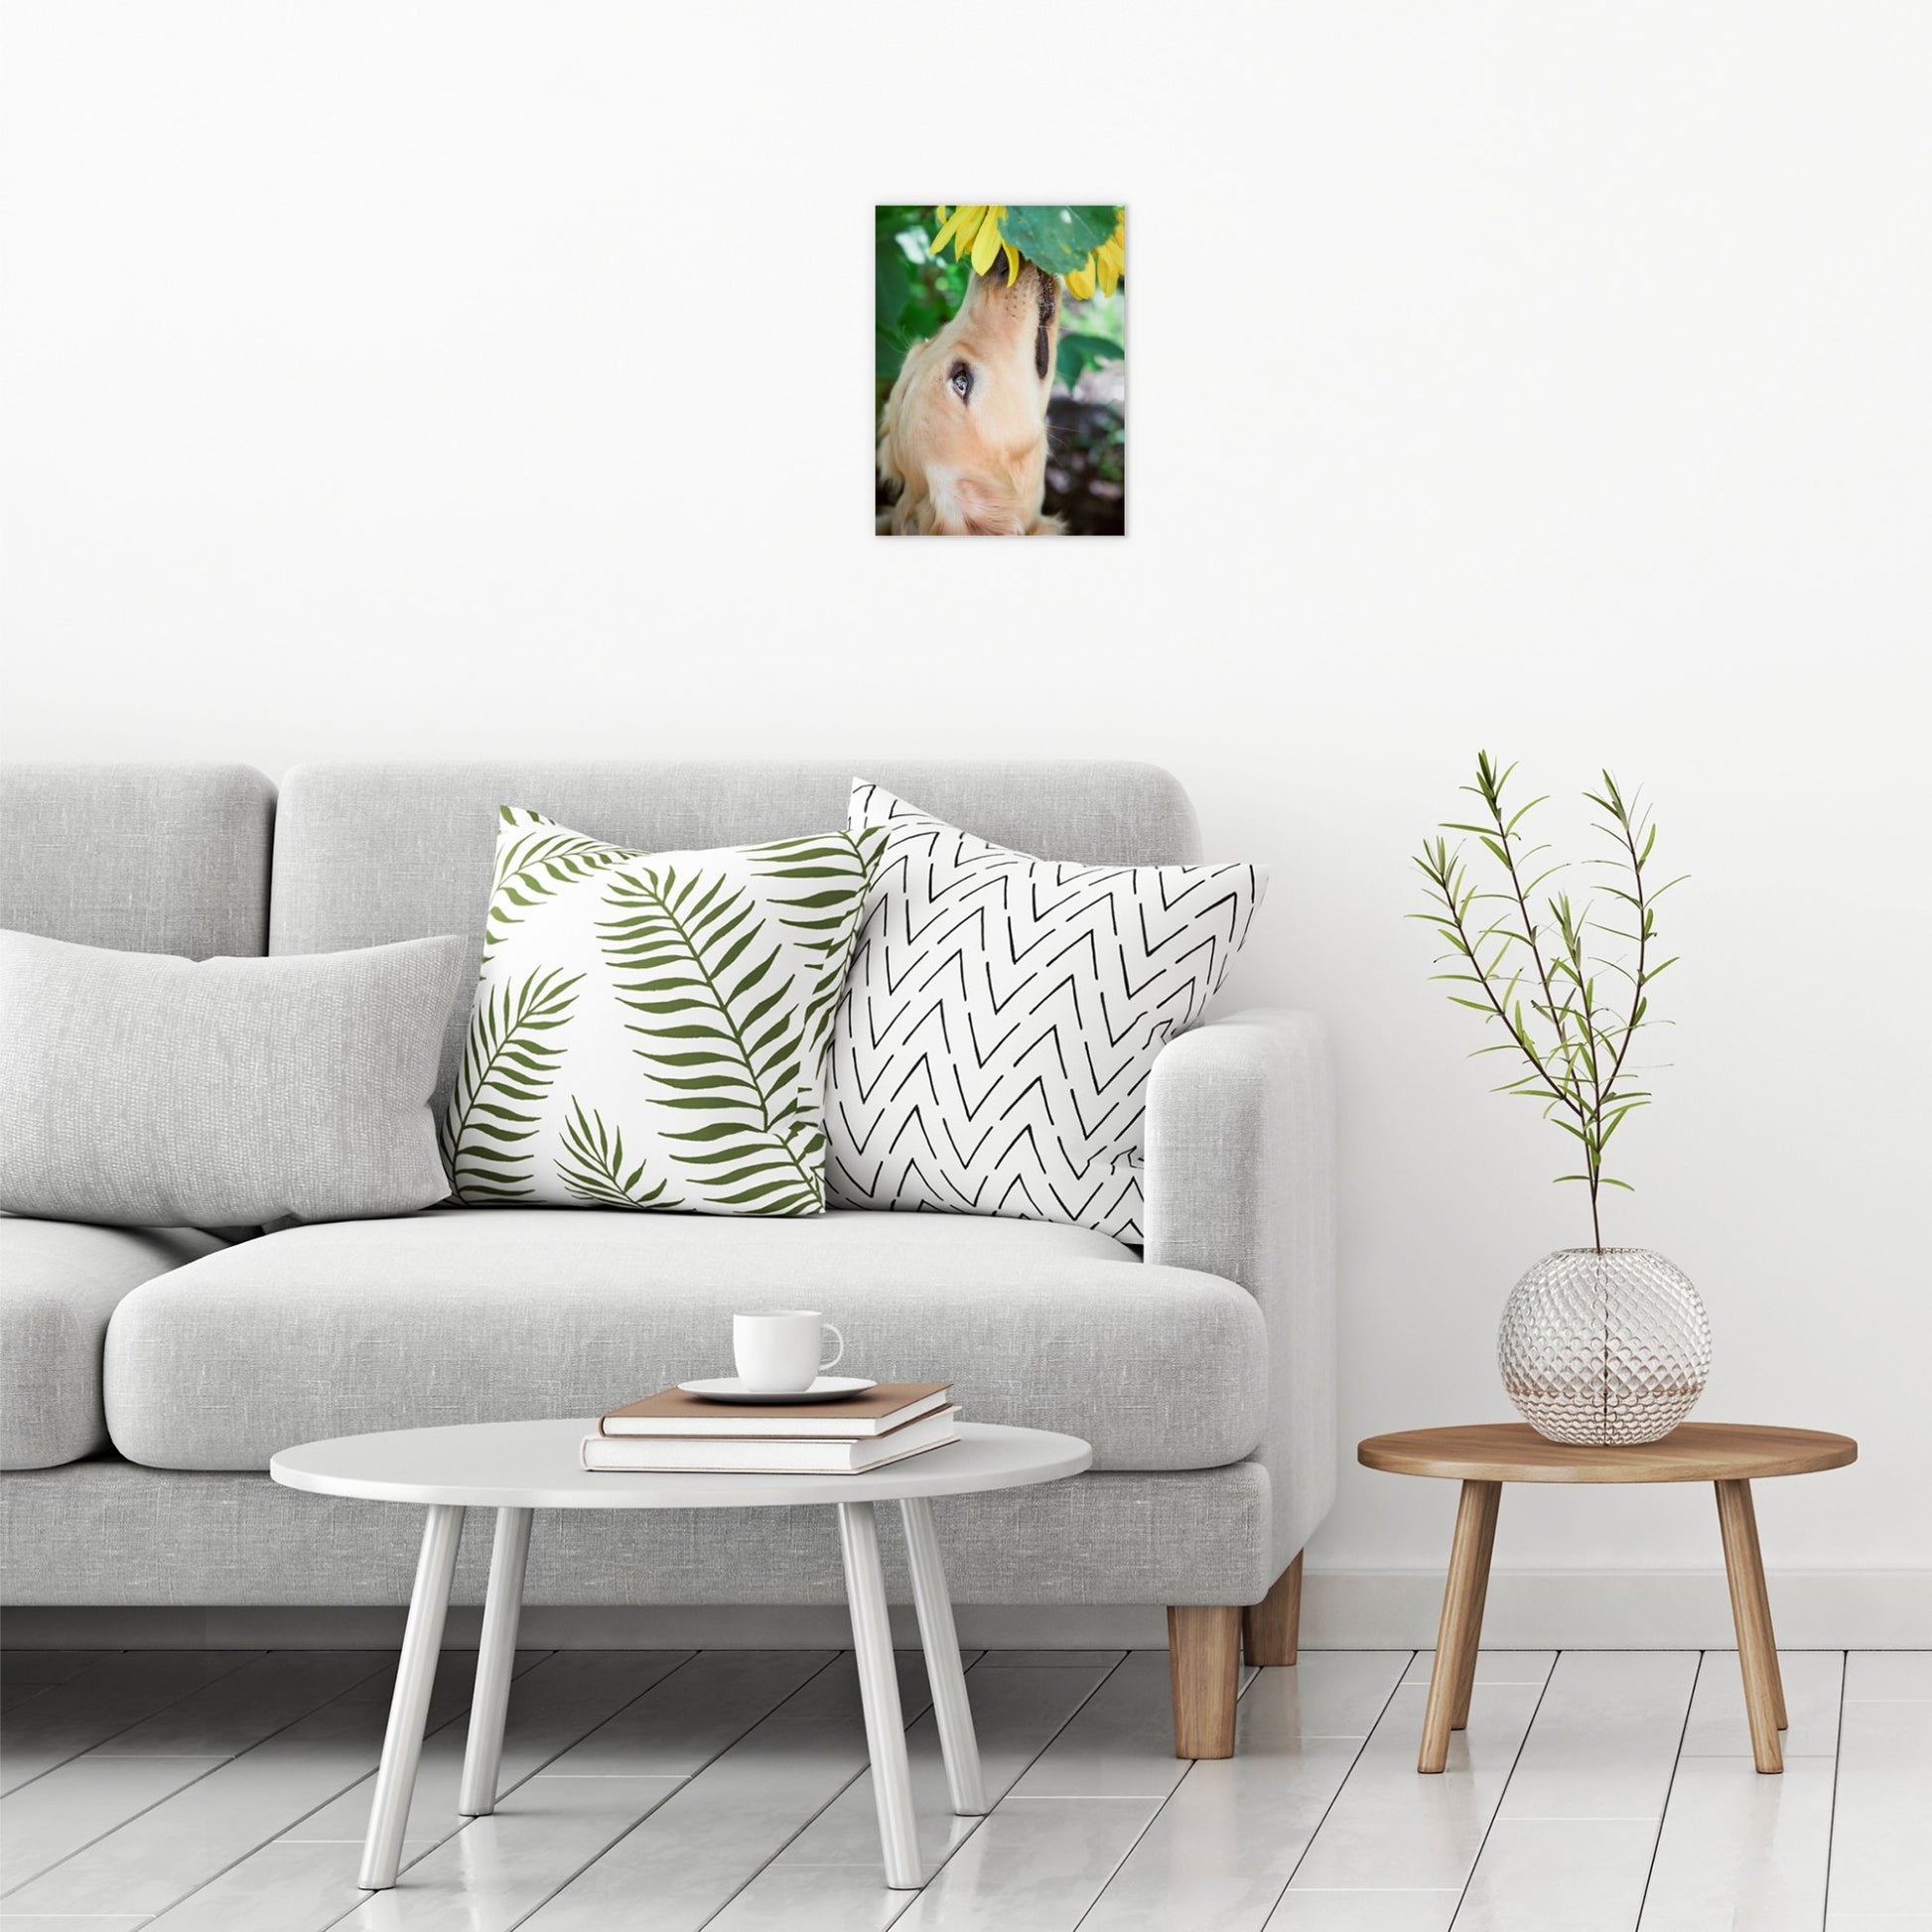 A contemporary modern room view showing a small size metal art poster display plate with printed design of a Golden Retriever with a Flower